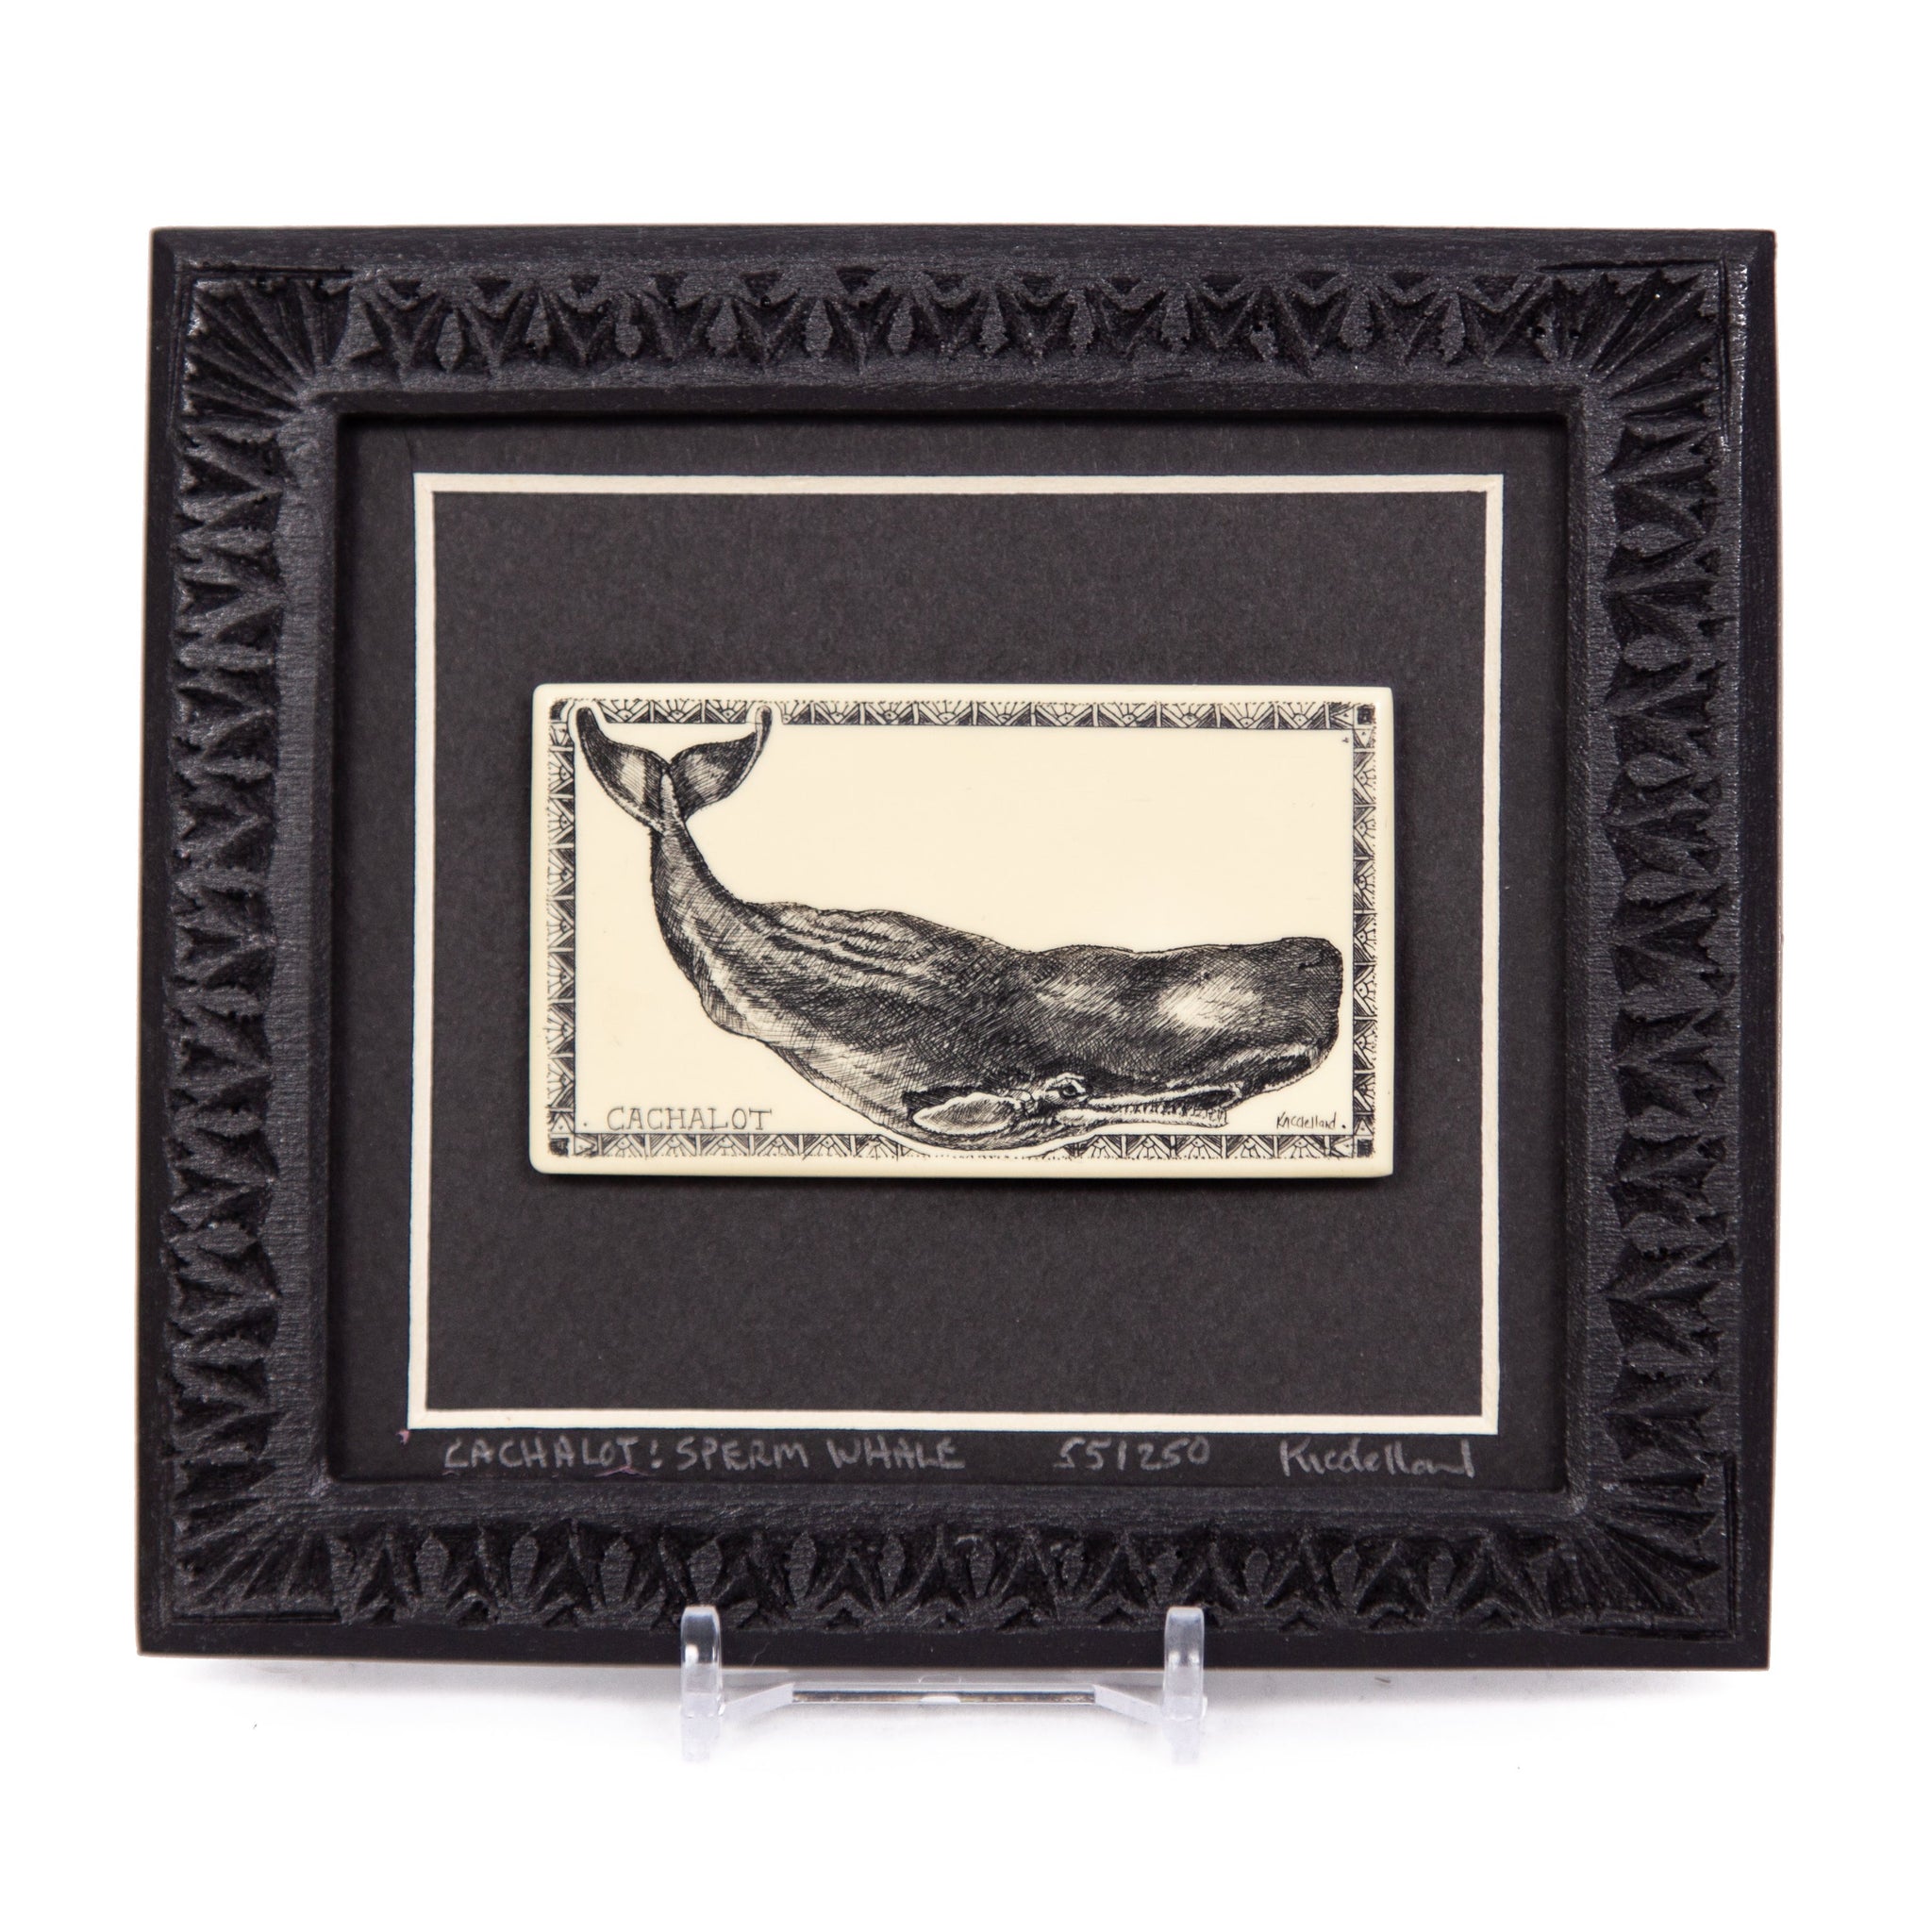 "Cachalot: Sperm Whale" Large Chip Carved Frame